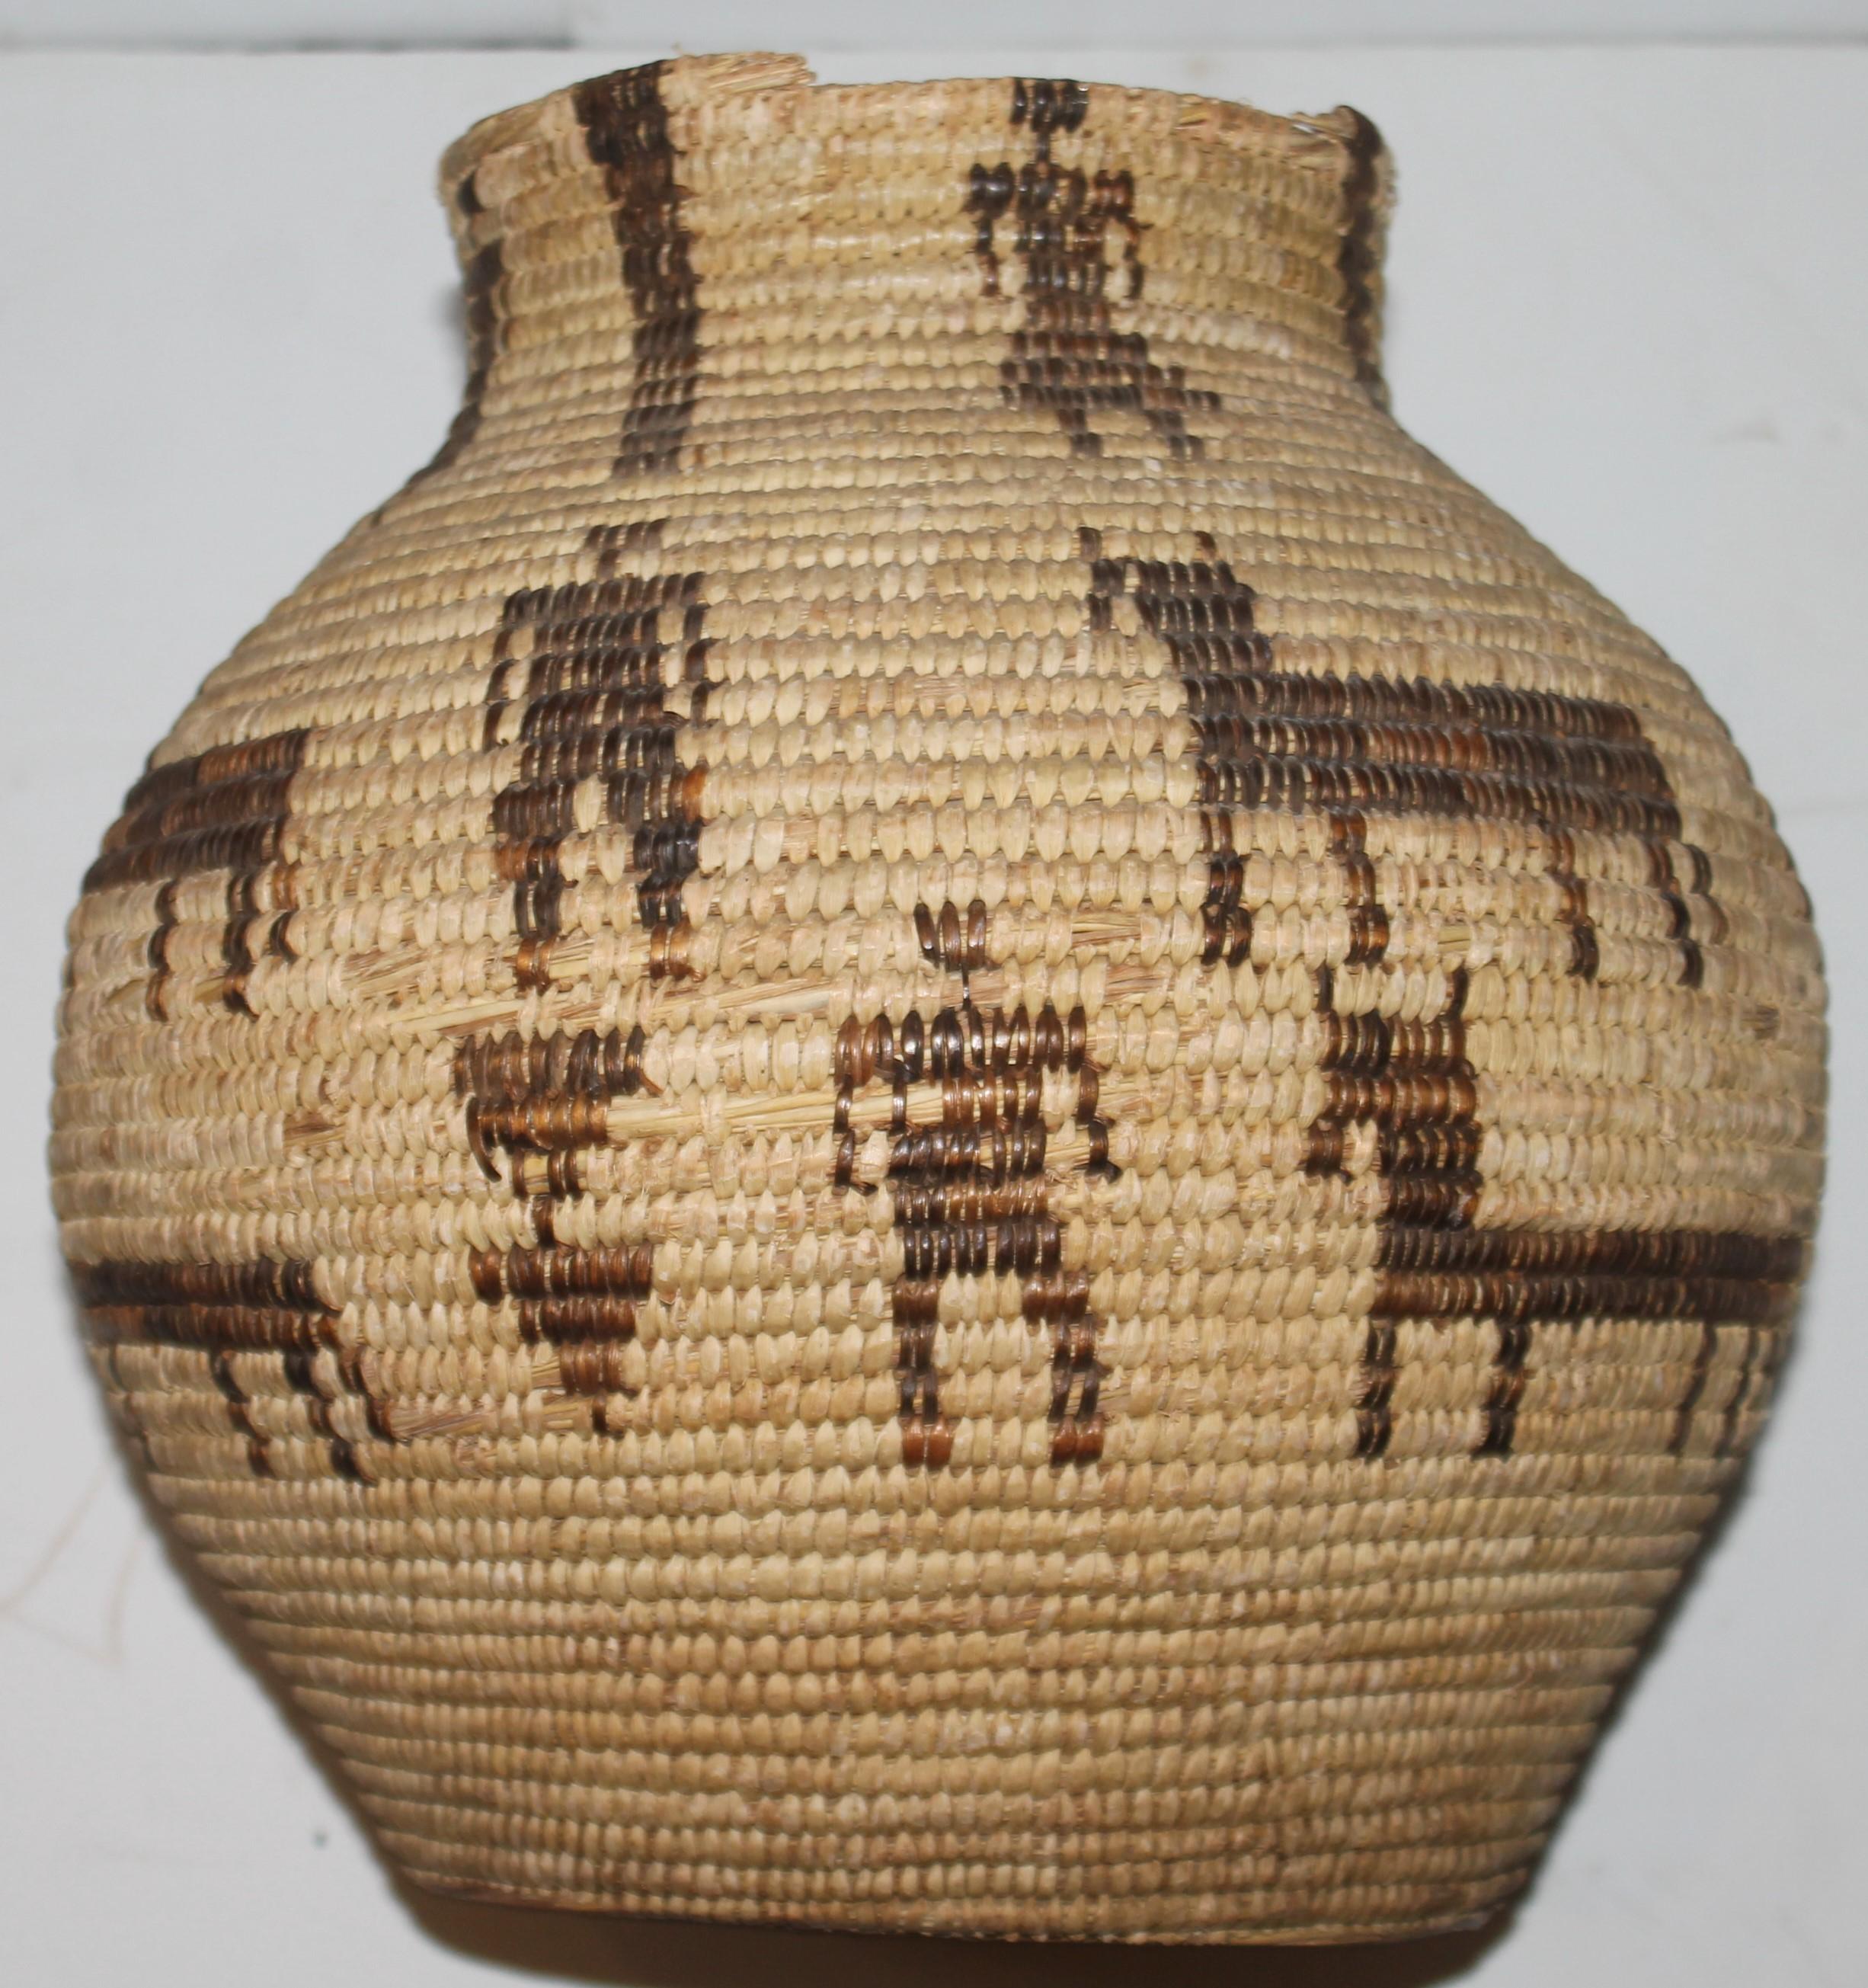 This fine American Indian Pima pictorial basket is in fine condition except some roughness around the top edge of the basket. The base has some minor glue in areas from another private collector.